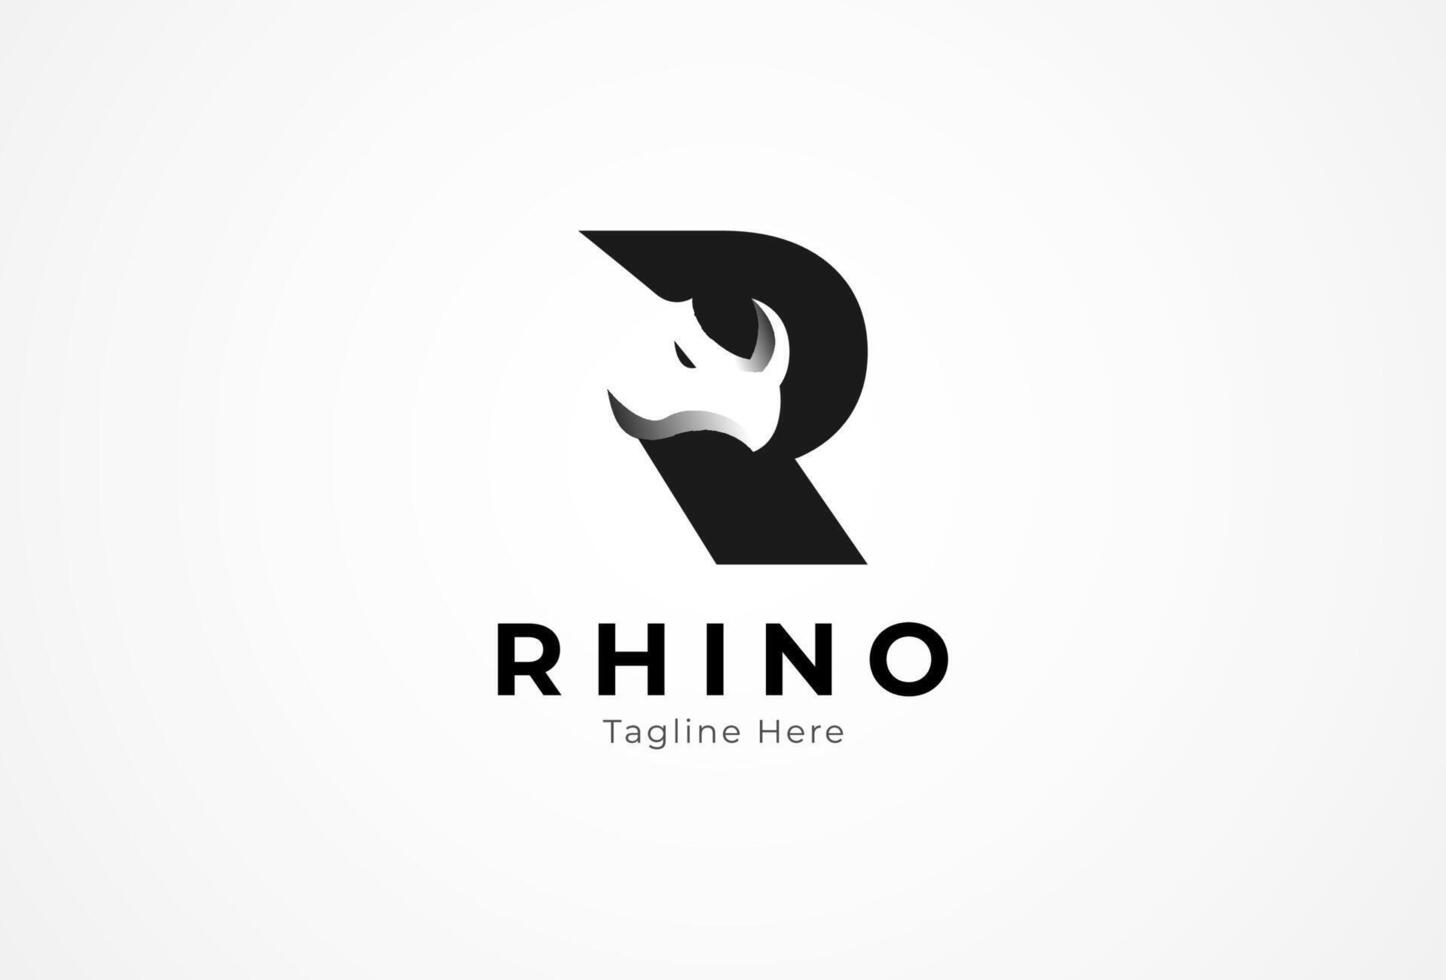 Letter R Rhino Logo, initial R with negative space rhino's head, flat design logo template, illustration vector